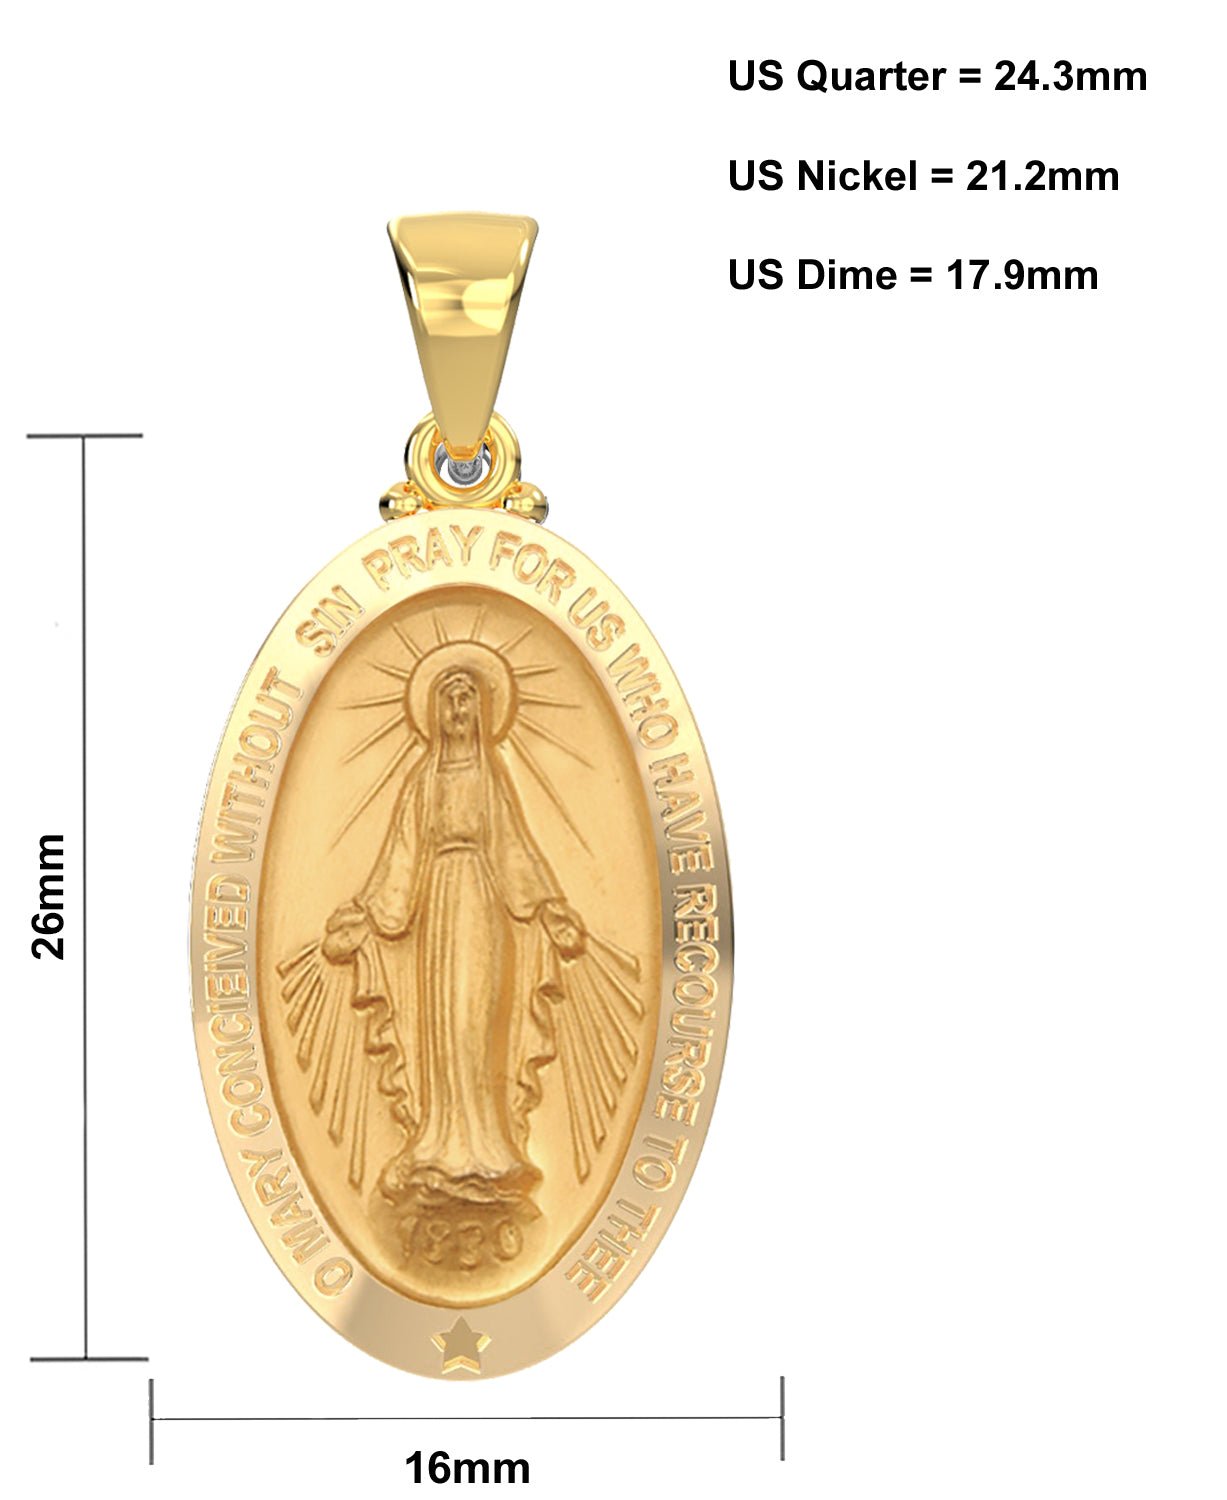 Ladies 14K Yellow Gold Miraculous Virgin Mary Hollow Oval Polished Pendant Necklace, 26mm - US Jewels